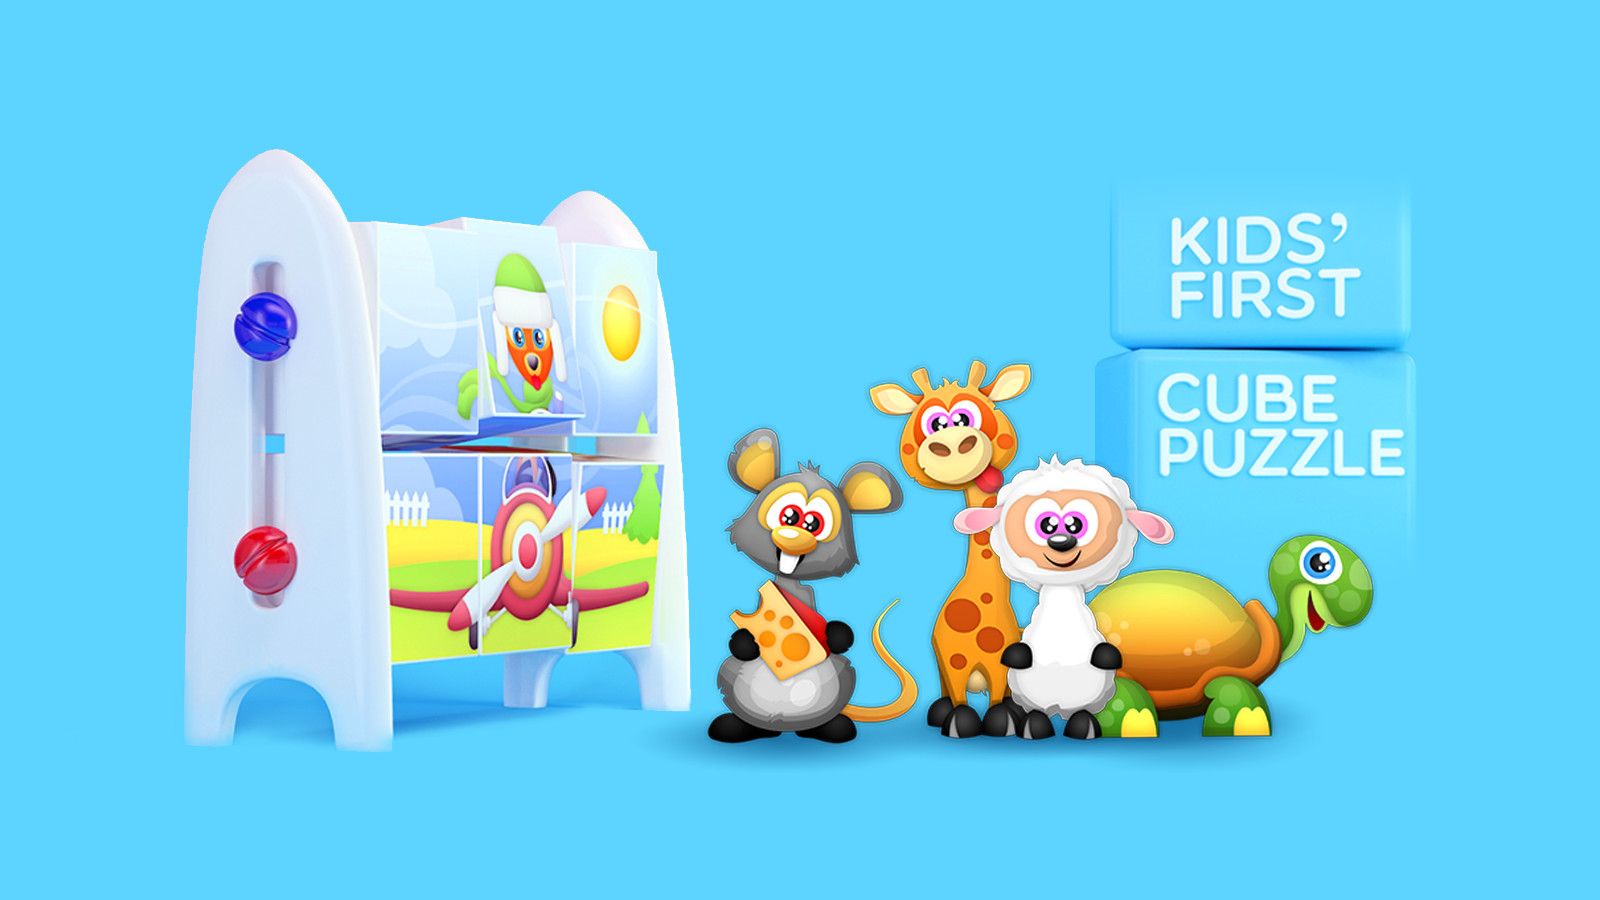 Play Video - Kids’ First Cube Puzzle